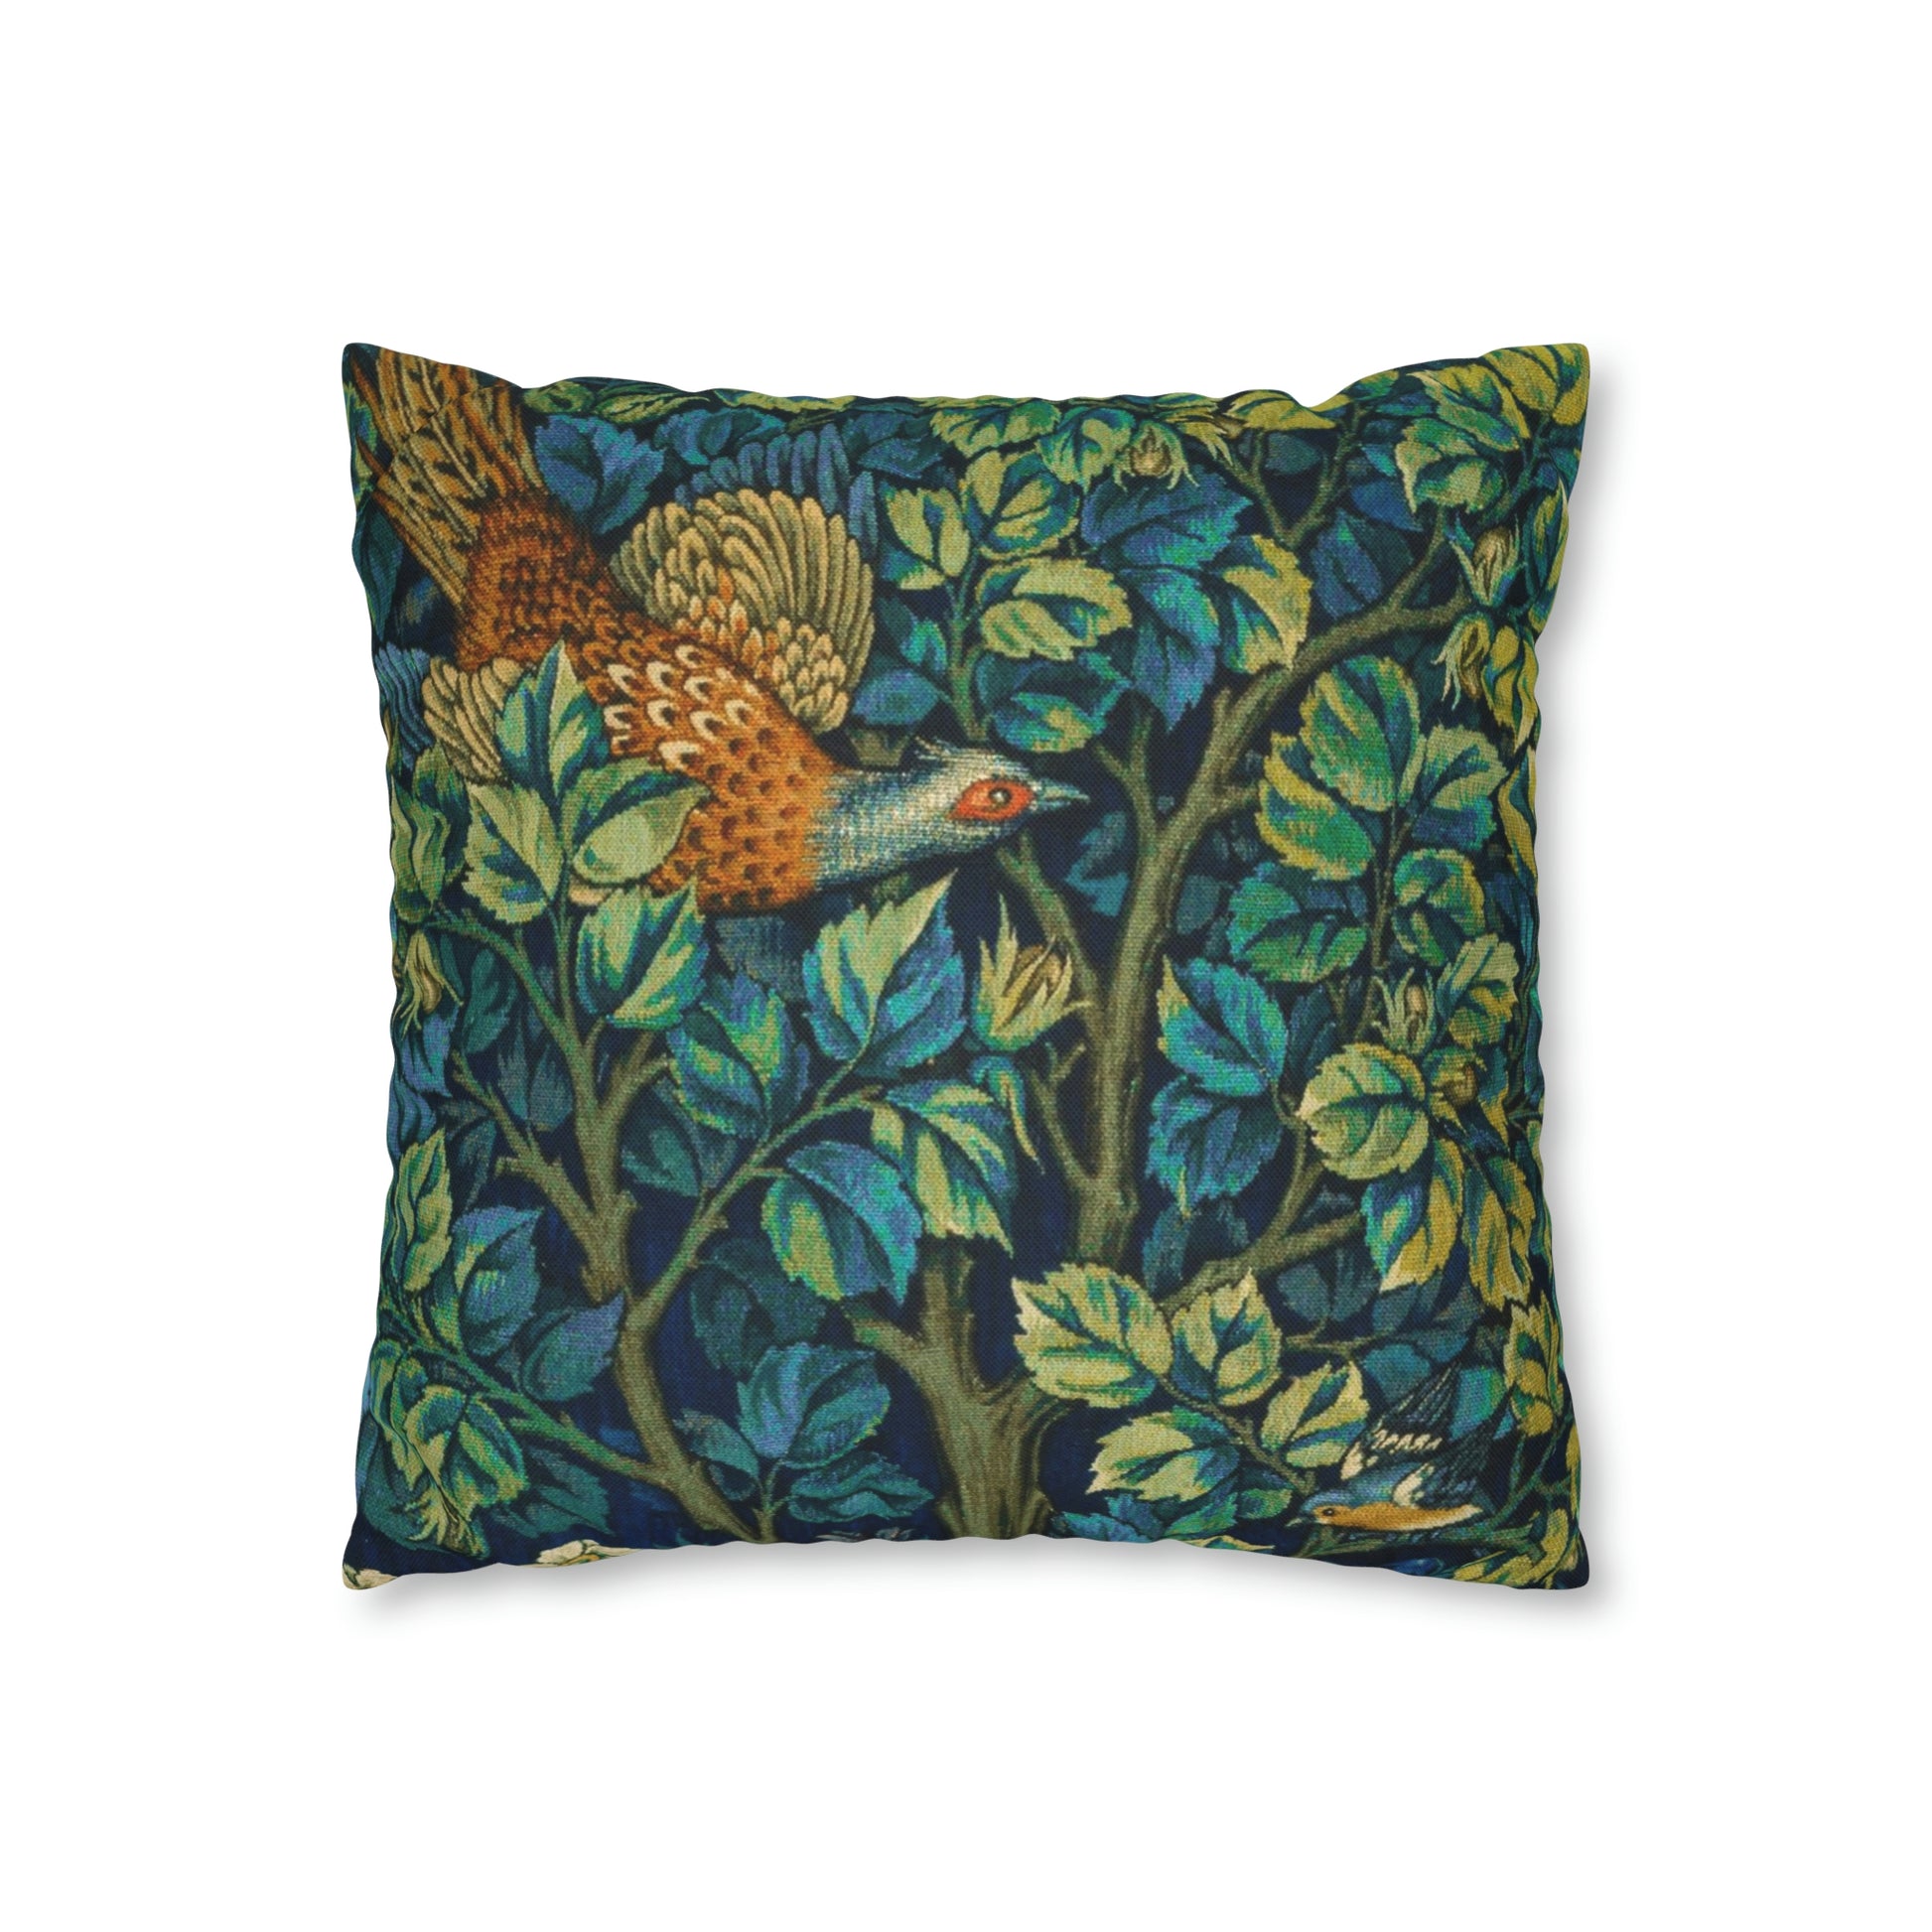 william-morris-co-cushion-cover-pheasant-and-squirrel-collection-pheasant-blue-10